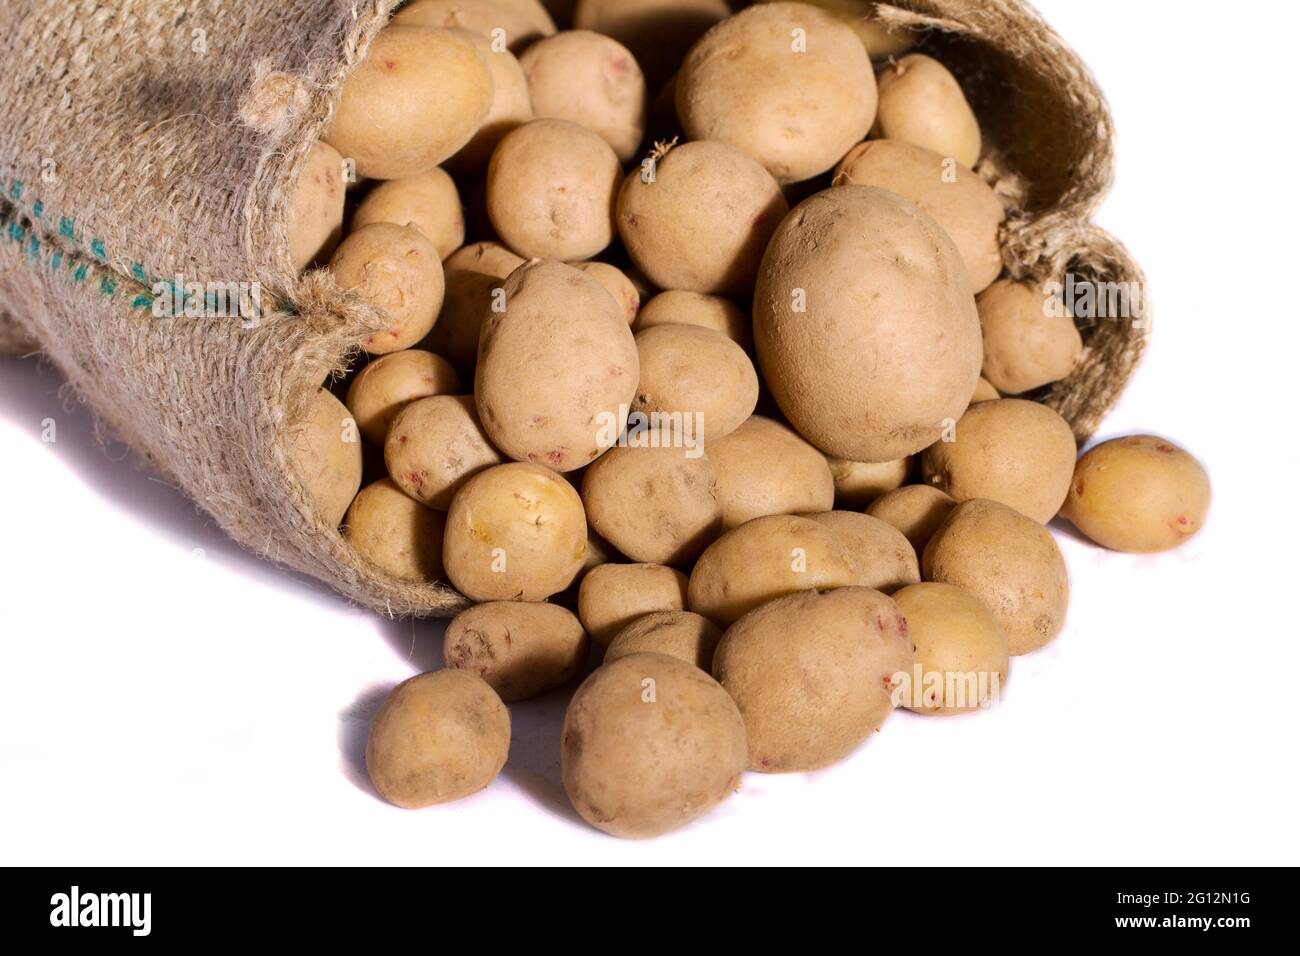 https://c8.alamy.com/comp/2G12N1G/view-of-a-sack-of-potatoes-isolated-on-a-white-background-2G12N1G.jpg